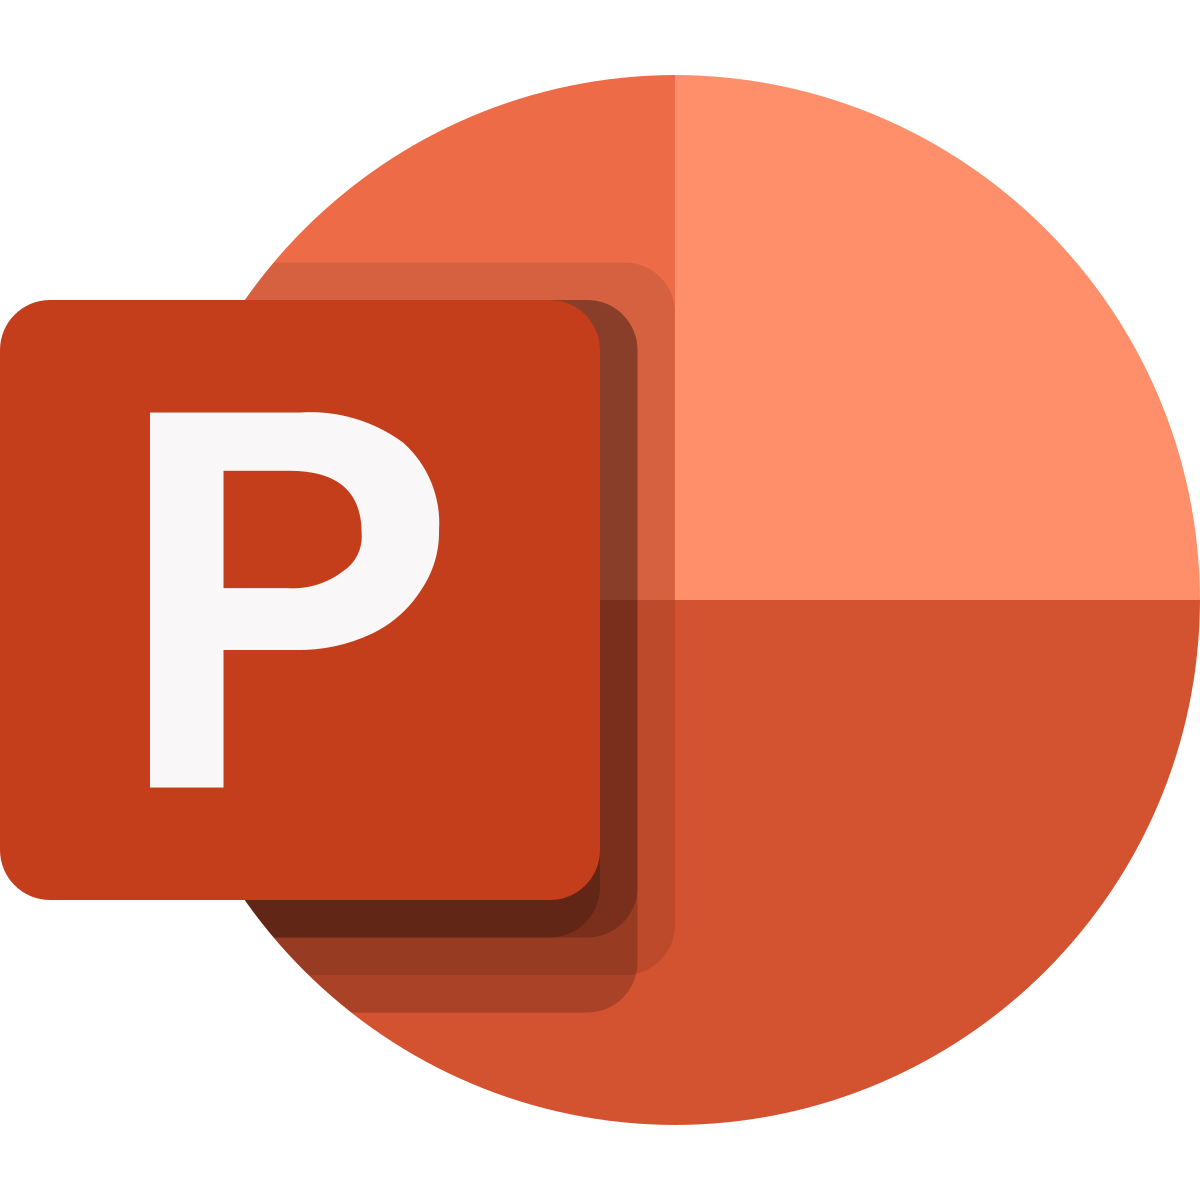 Image logo for PowerPoint.